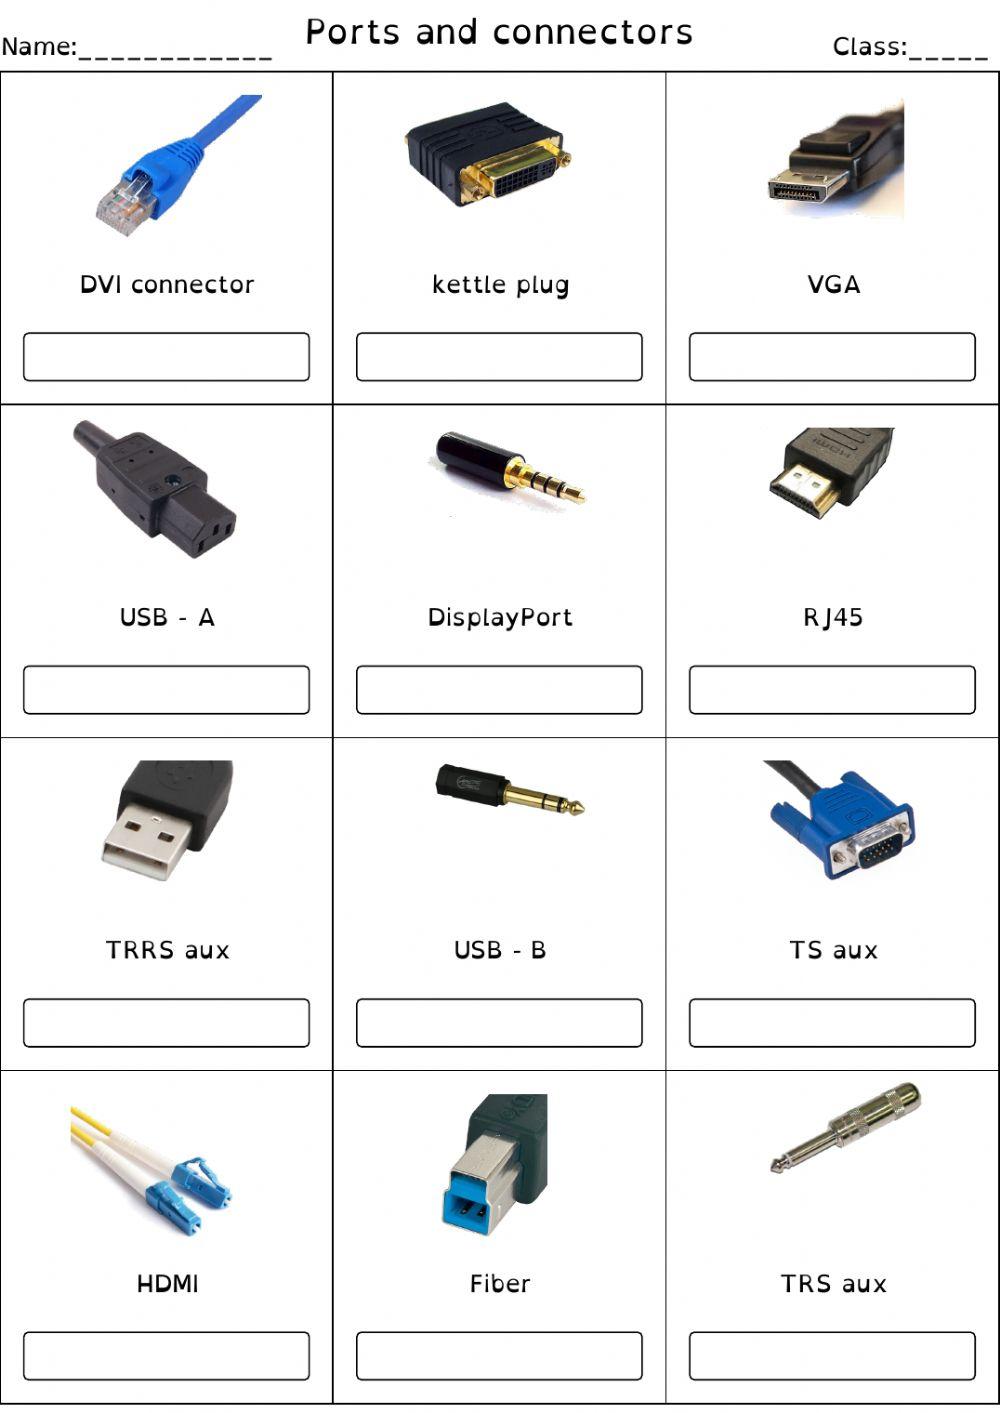 Computers - ports and connectors